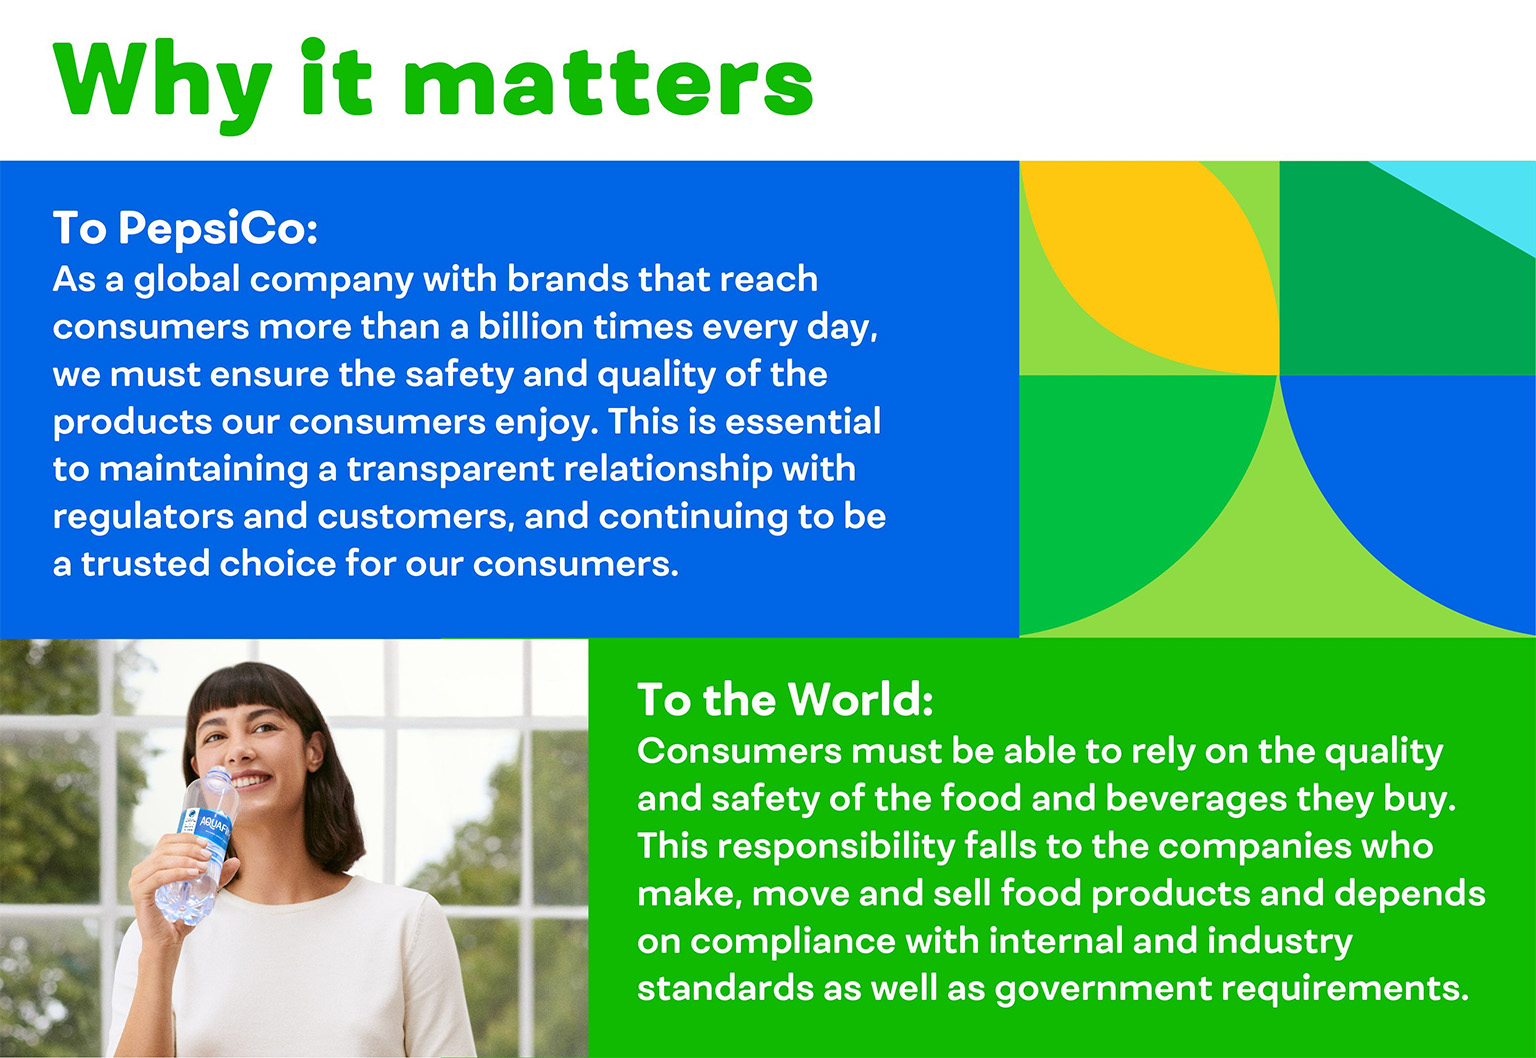 product-quality-and-safety-why-it-matters